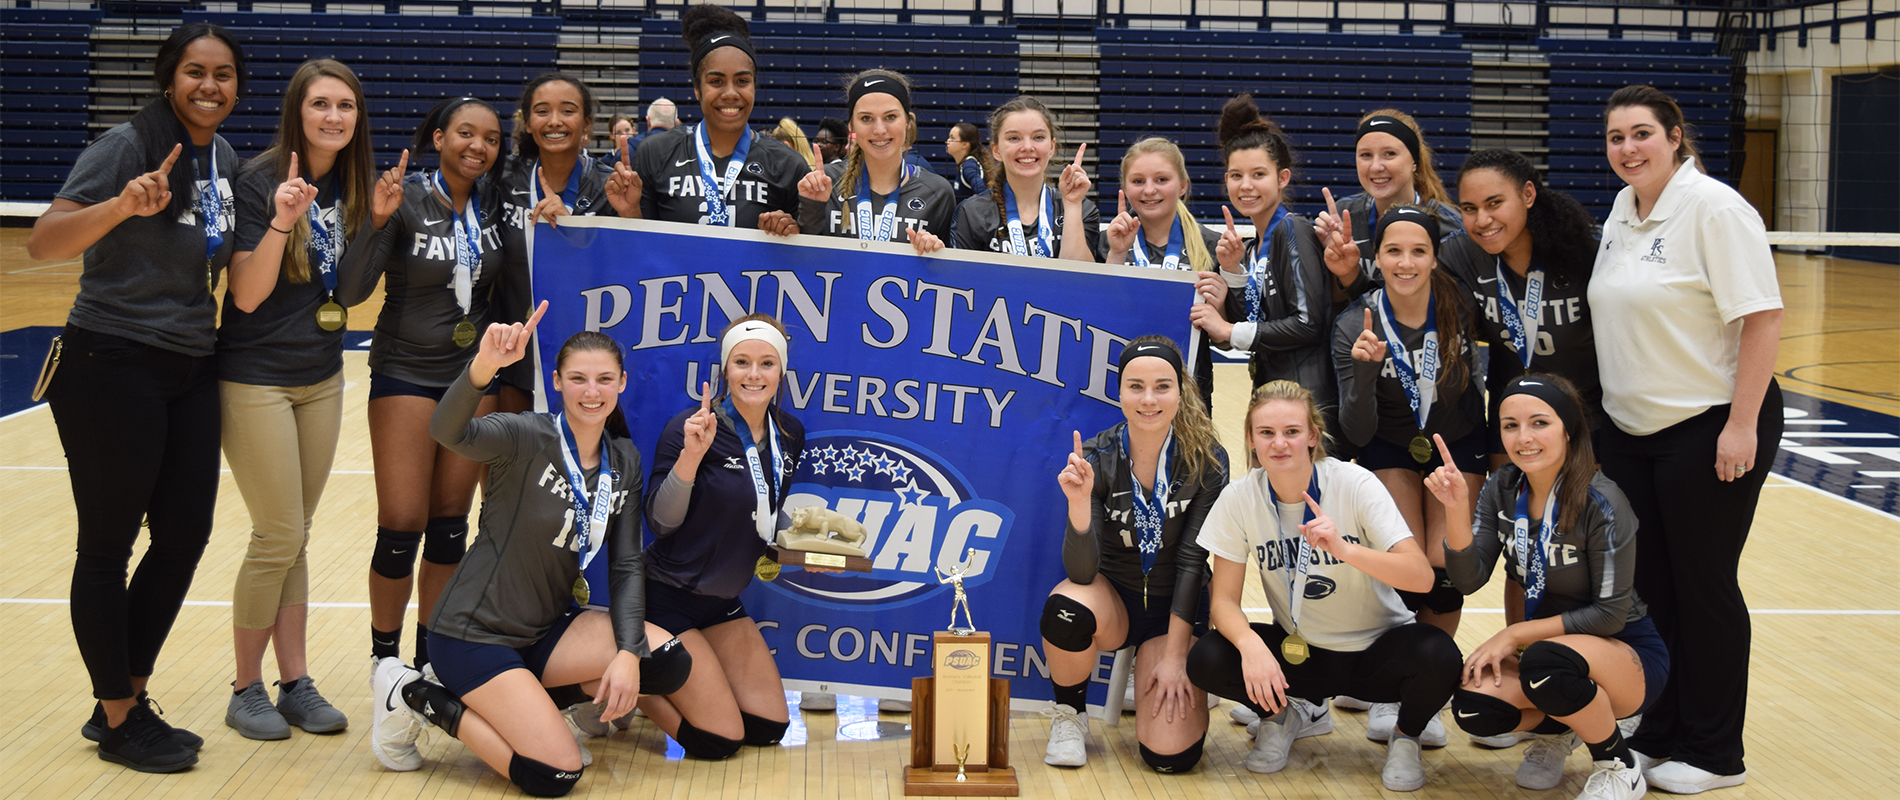 The 2018 PSUAC Volleyball Champions, Penn State Fayette.